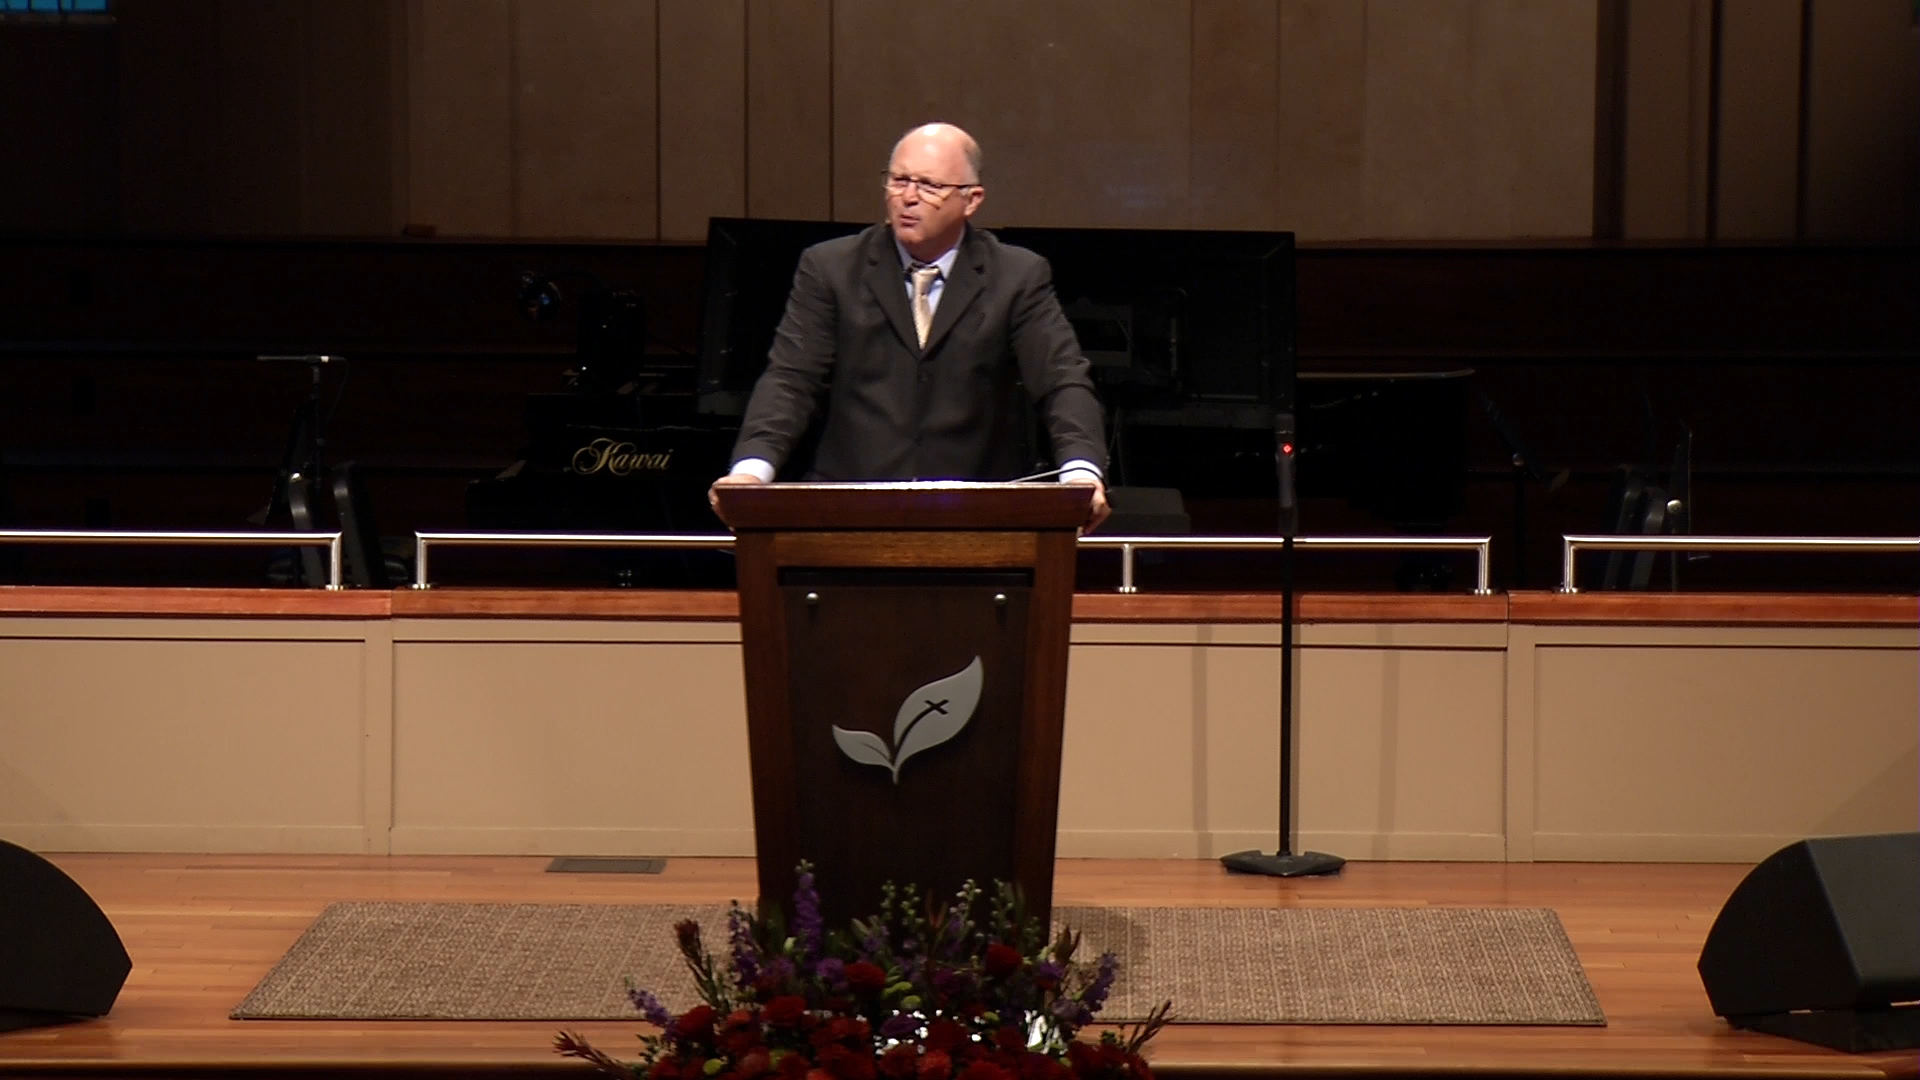 Pastor Paul Chappell: Strengthened by a Confident Hope